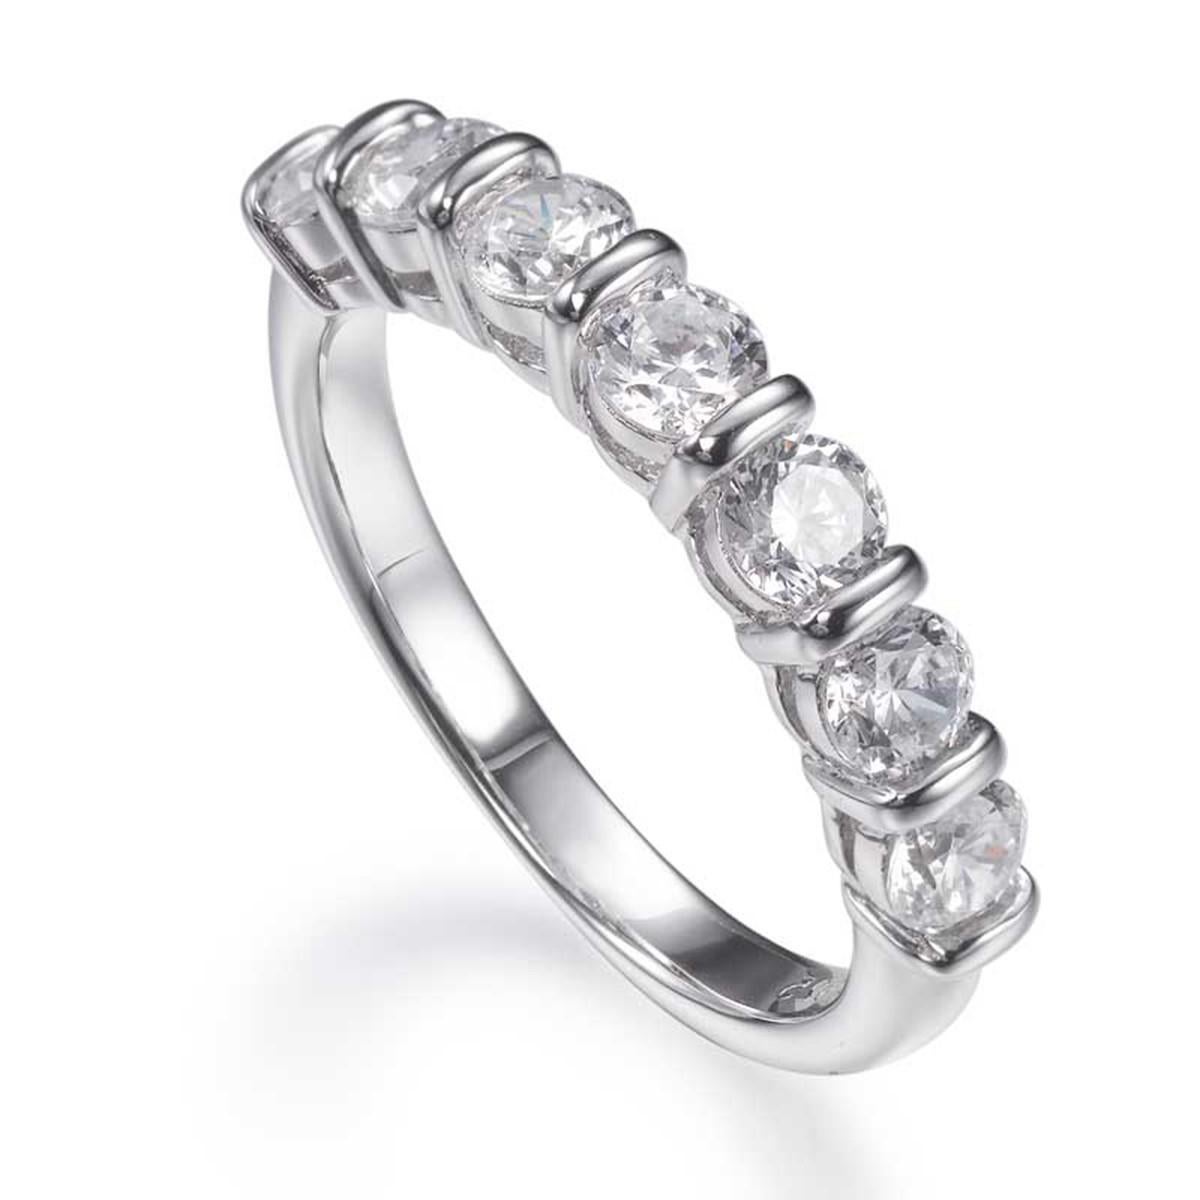 Introducing our exquisite Seen Stone 2.00ct Cubic Zirconia Half Eternity Ring, a captivating statement of sophistication and style. This stunning piece boasts seven brilliant-cut cubic zirconias, totaling 2.00ct, skillfully encased in an invisible